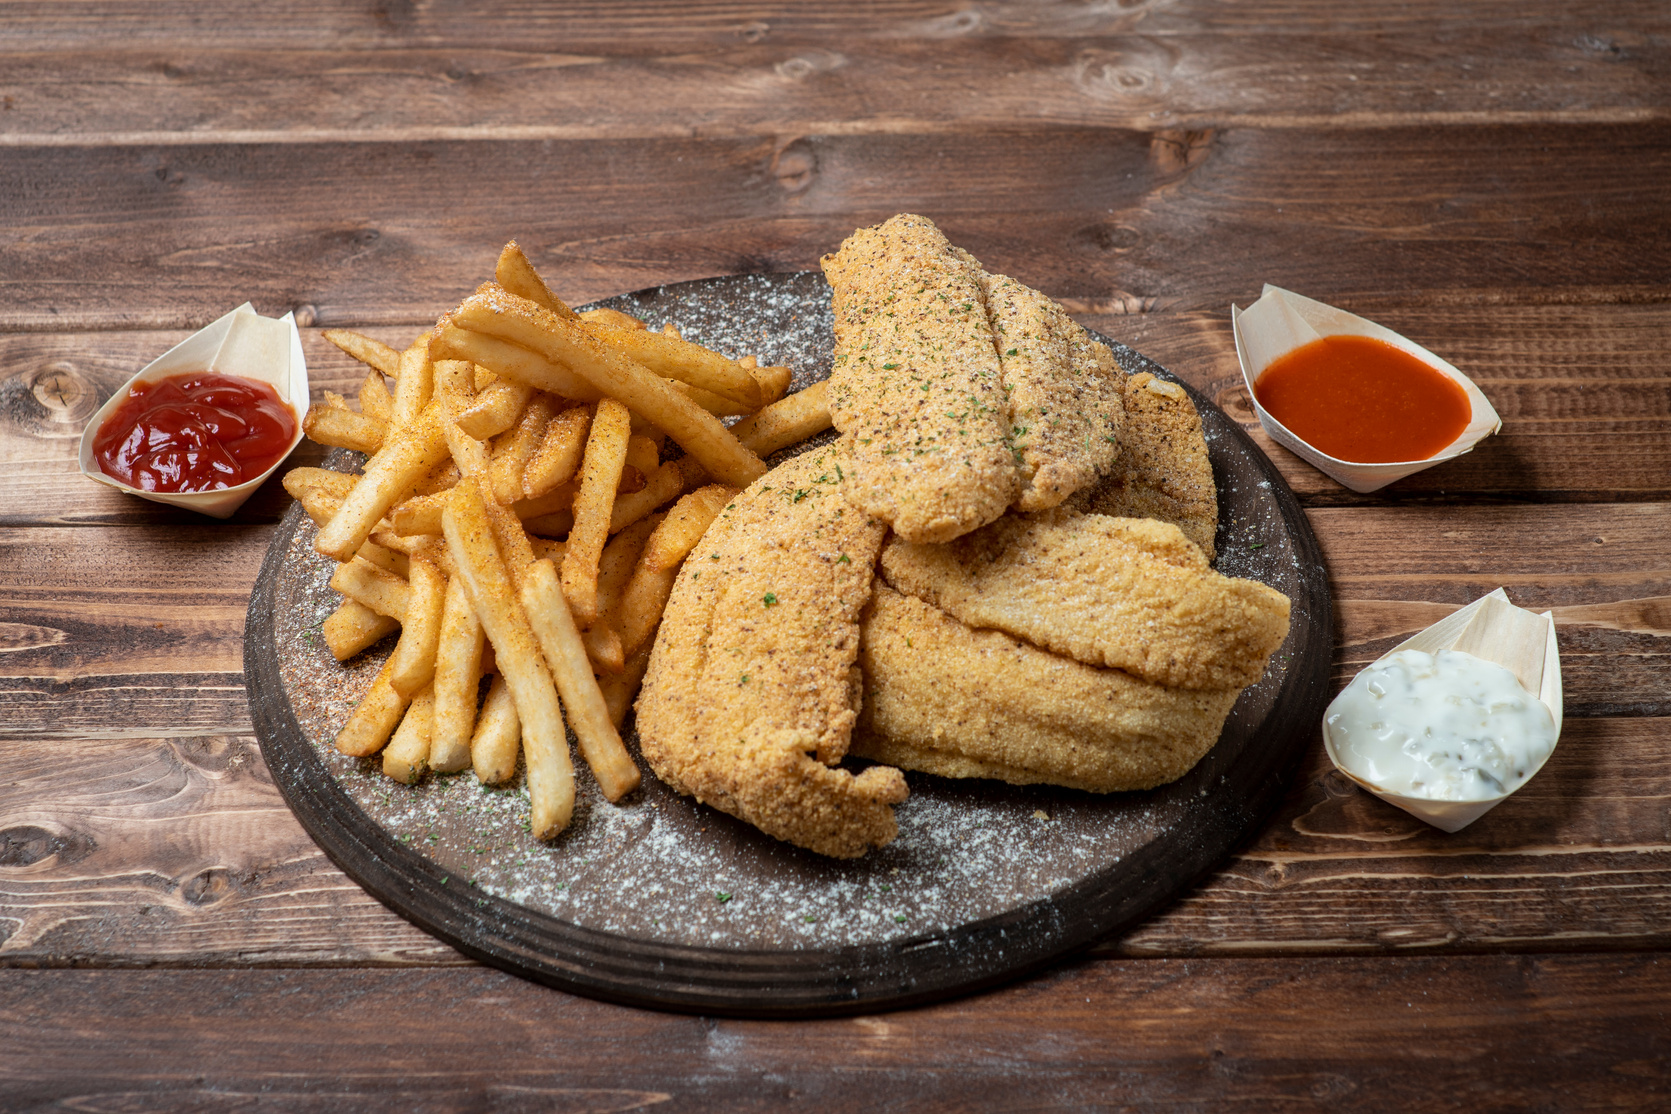 Fried catfish with fries